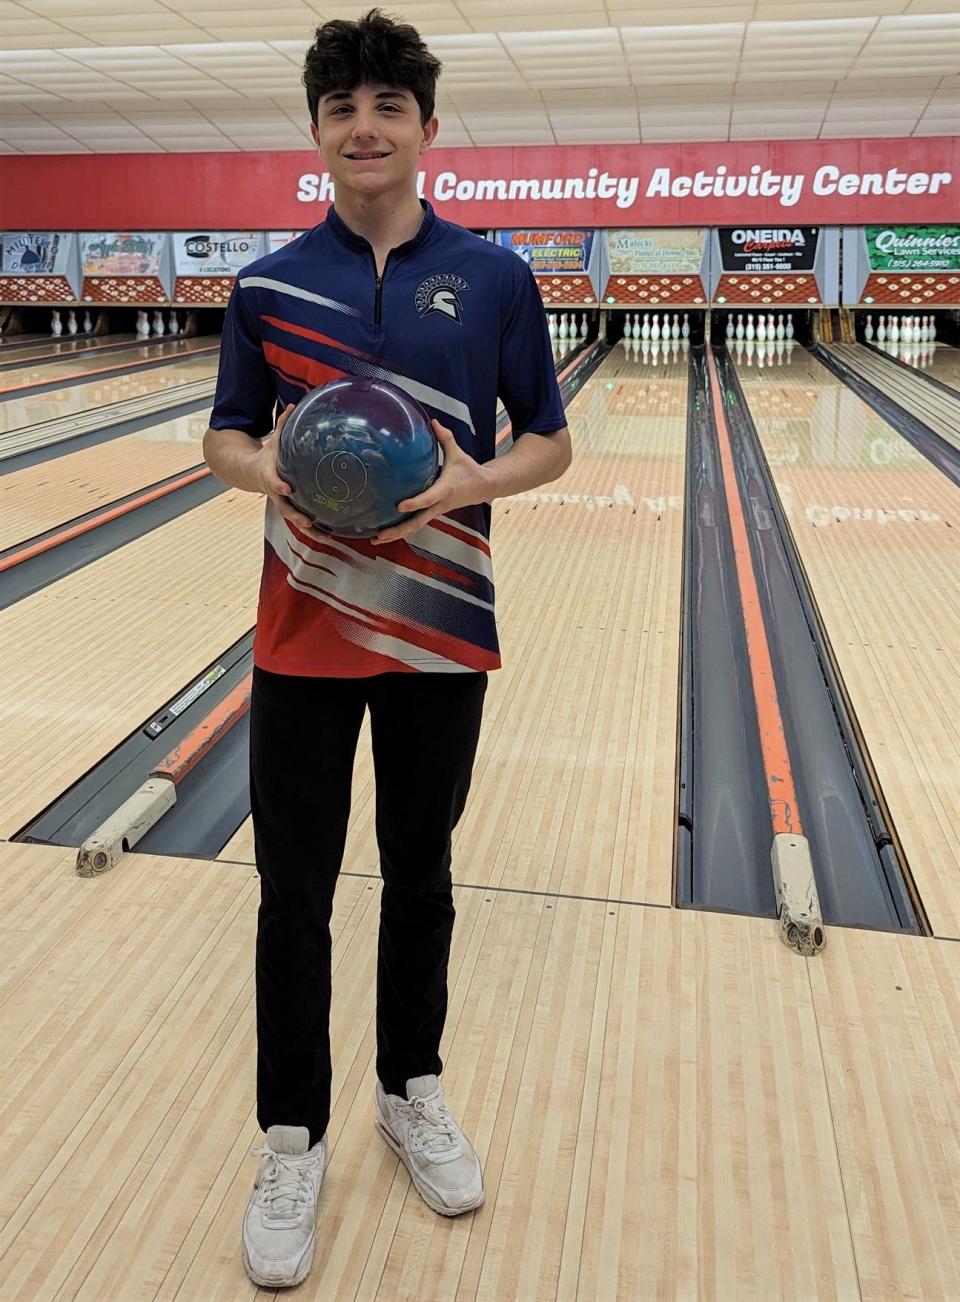 New Hartford junior Ray Cyr bowled a 300 game in the undefeated Spartans' match against Vernon-Verona-Sherrill Wednesday at the Community Activity Center in Sherrill.